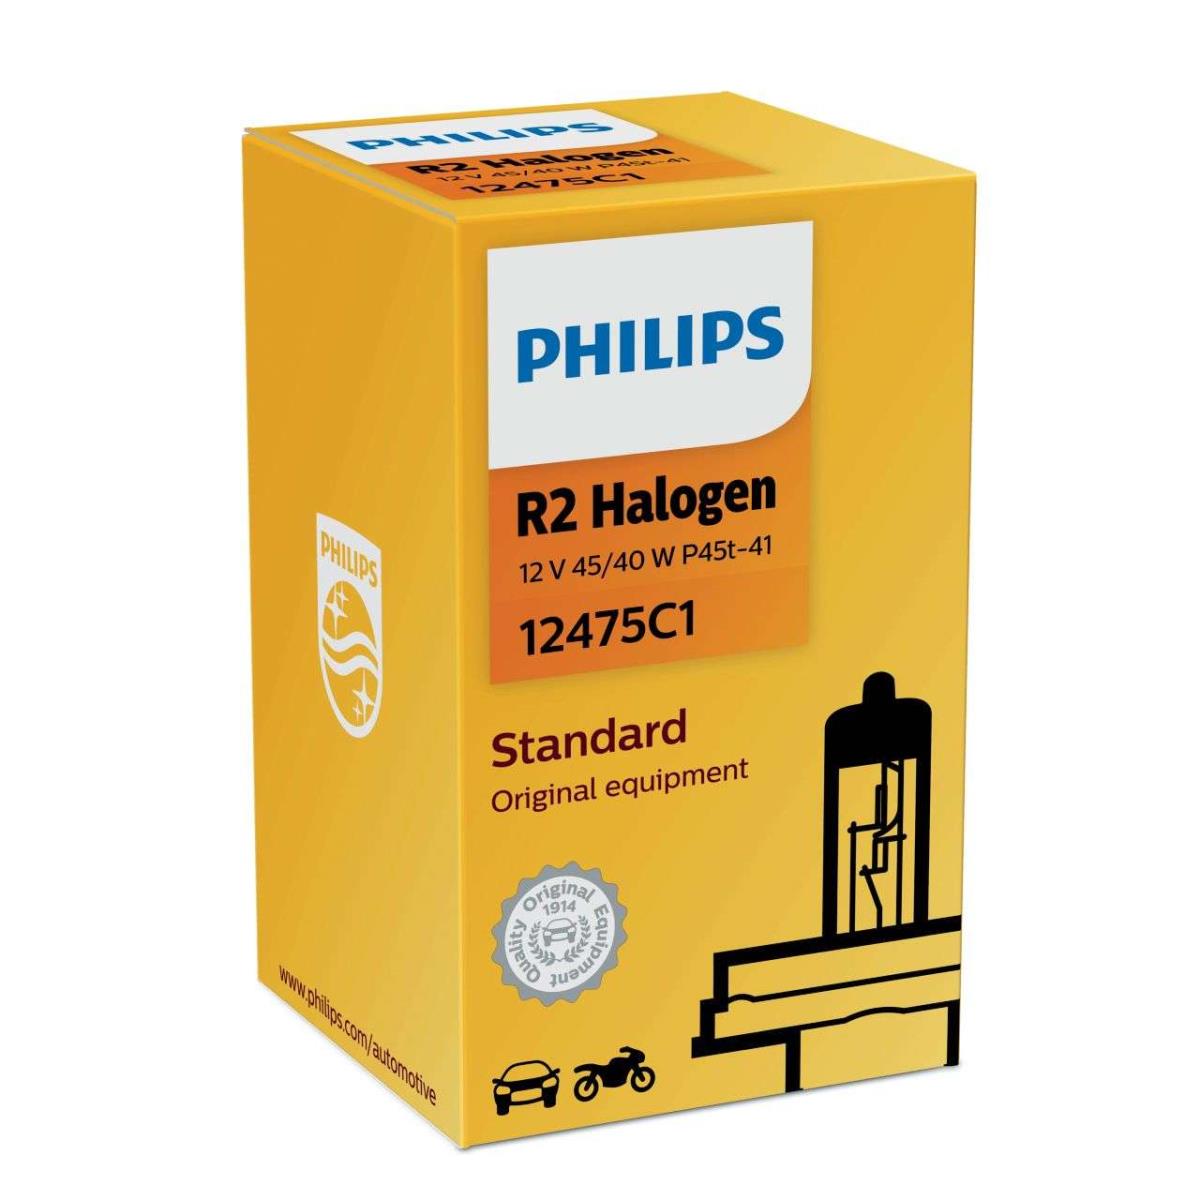 PHILIPS 12475C1 Glühlampe Beleuchtung